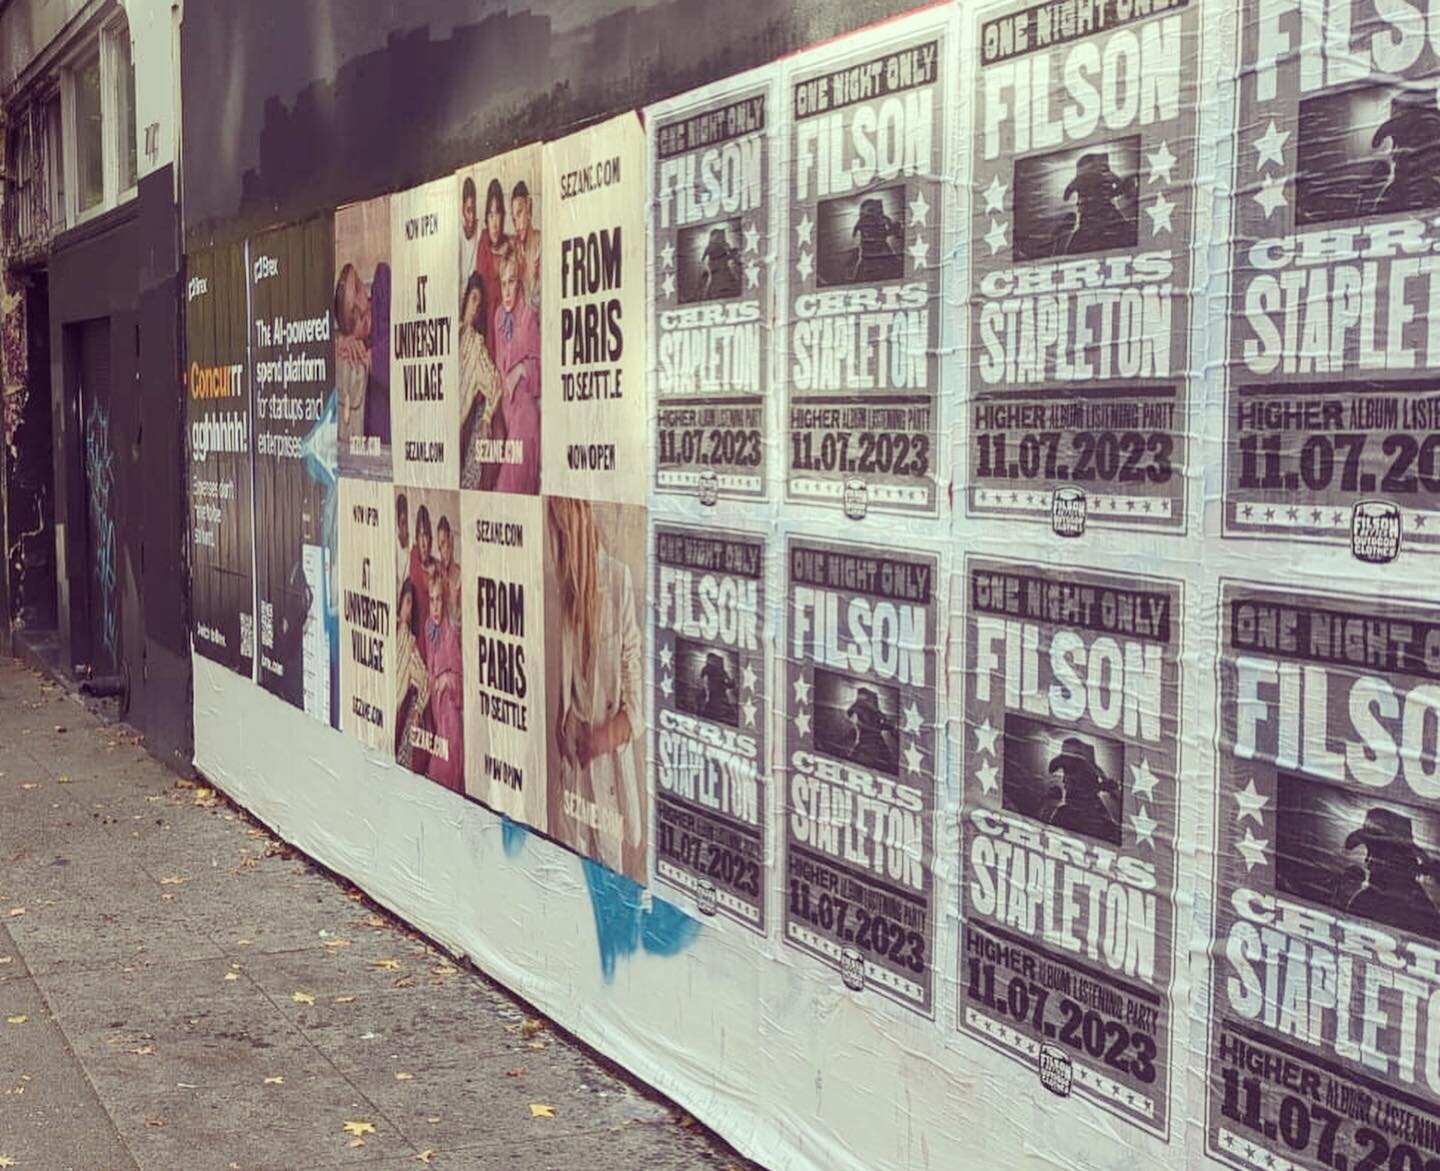 Got t some really cool photos of my @filson1897 x @chrisstapleton posters wheat-pasted up around Seattle! So stoked about Stapleton&rsquo;s new record, Higher, coming out in about 2 weeks! Everything I&rsquo;ve heard so far is great.
///
So often my 